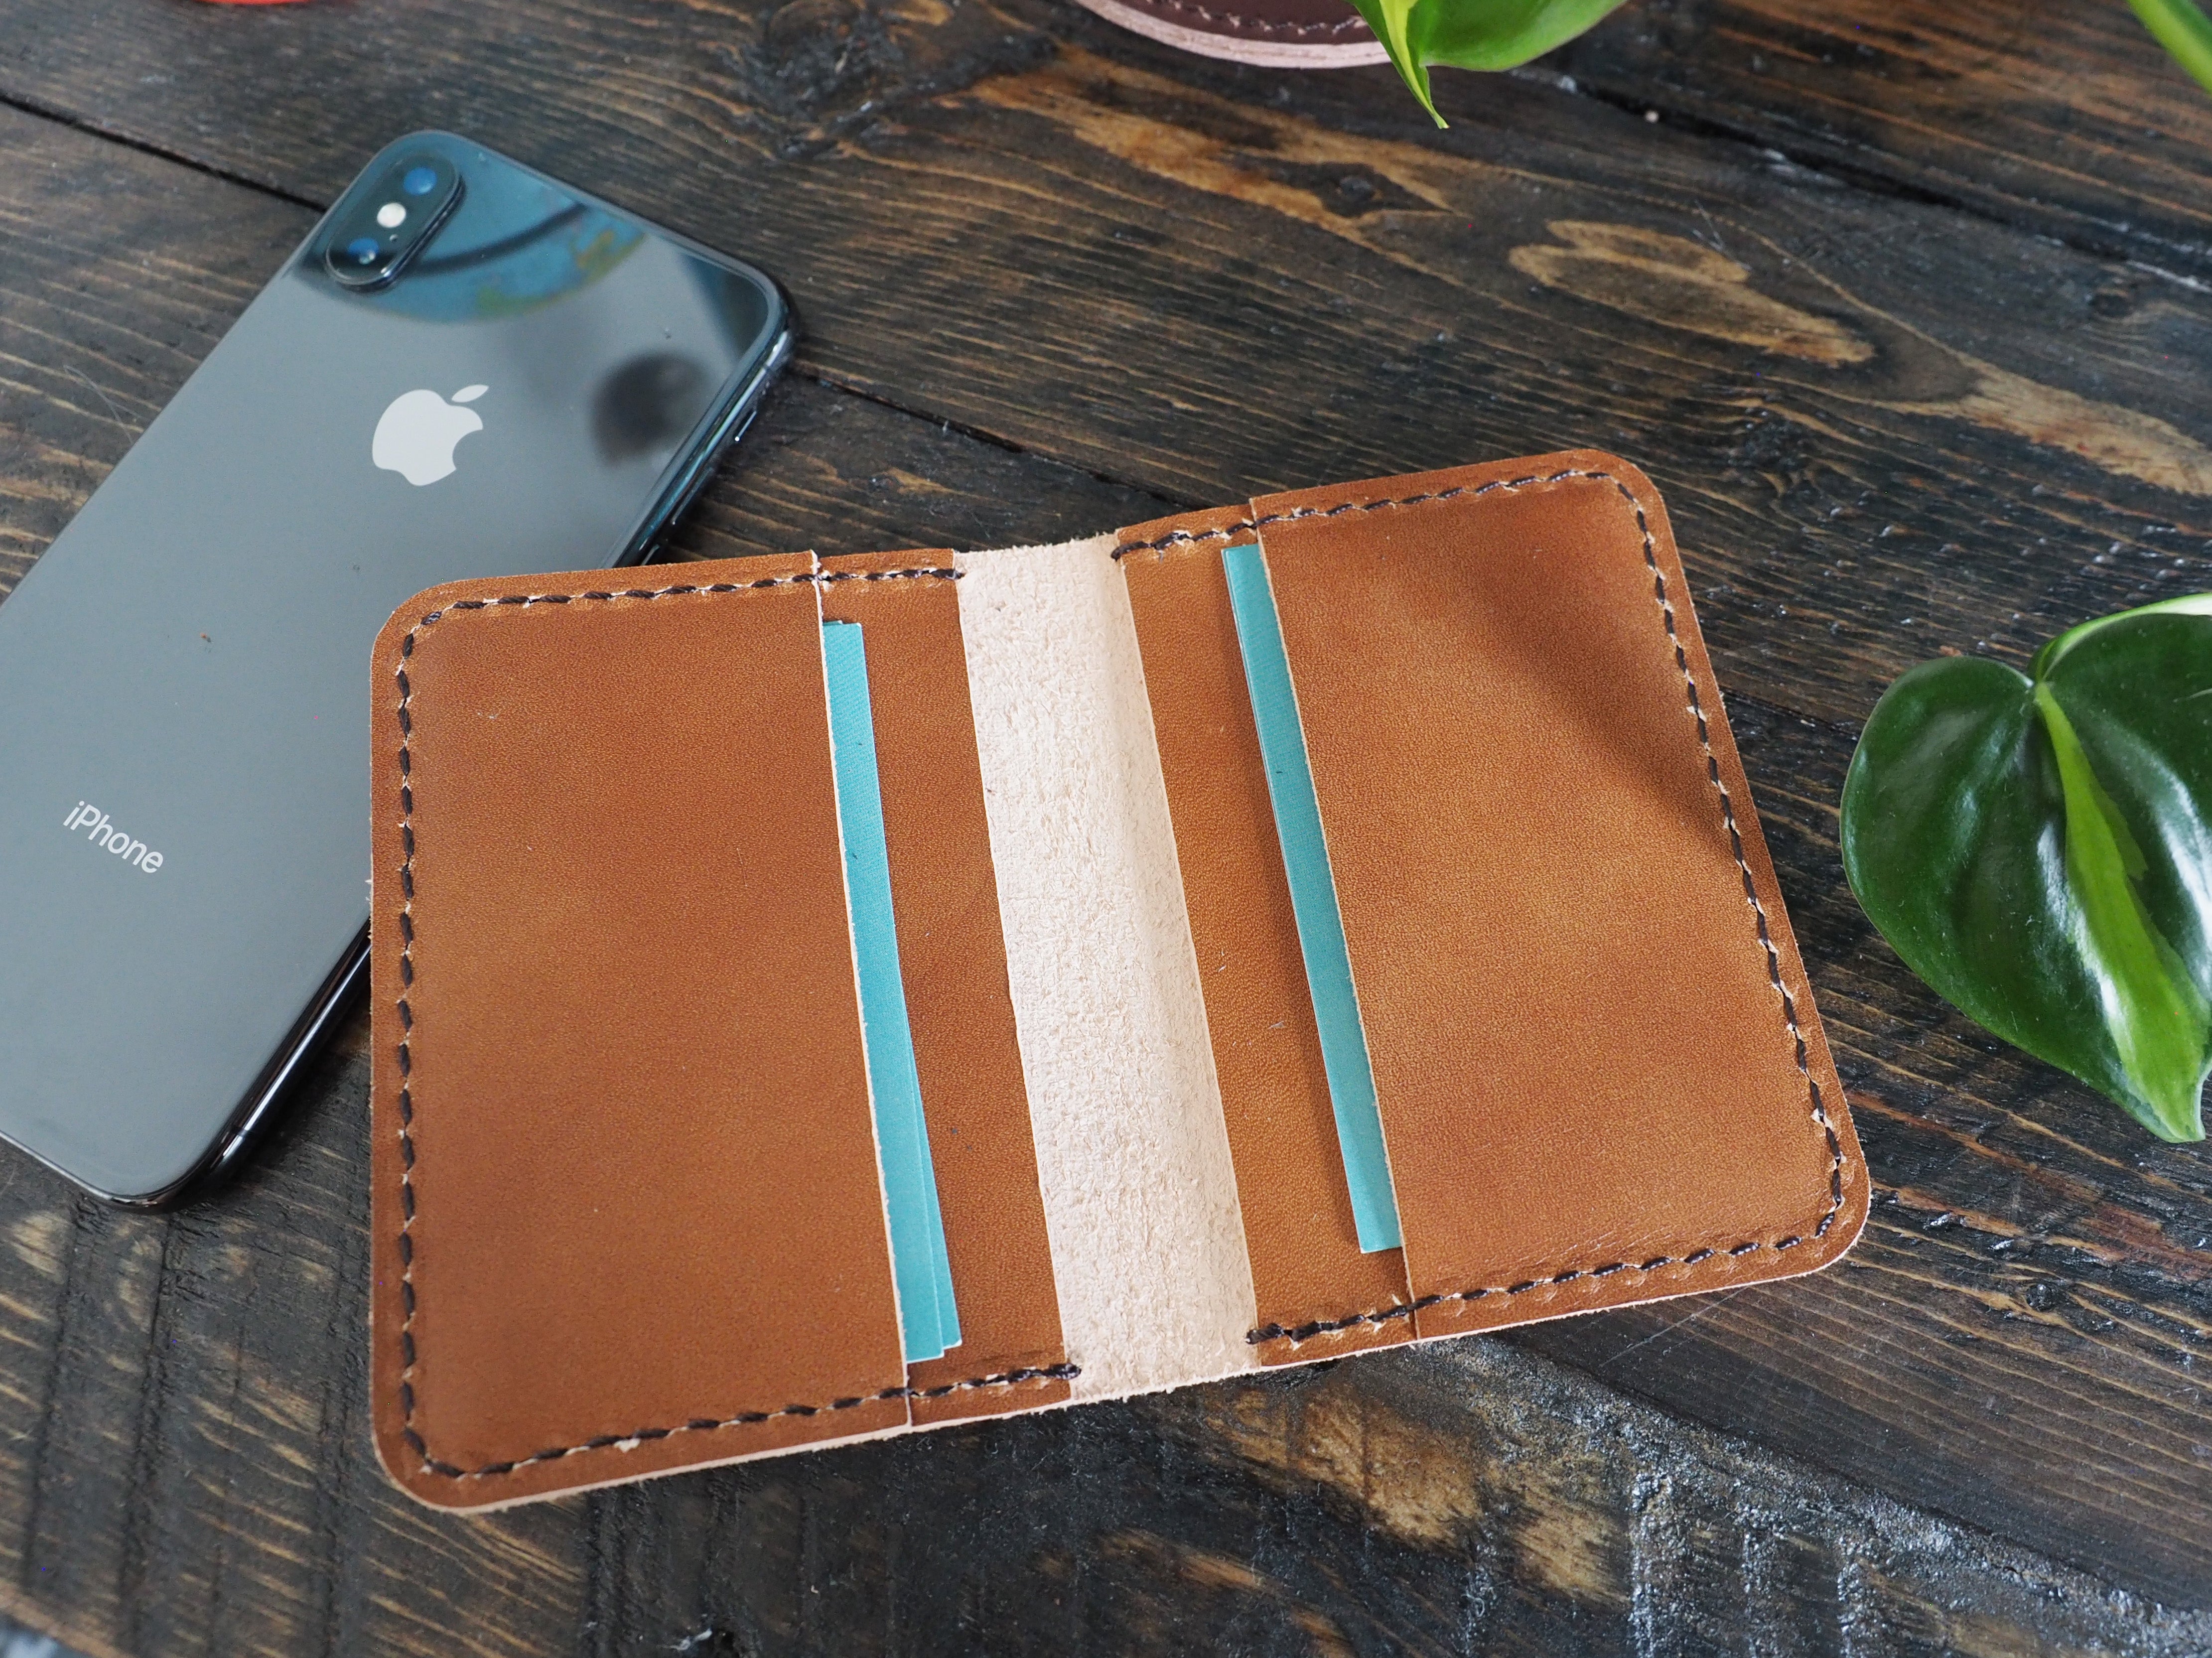 Snap Wallet – Marlondo Leather Co.